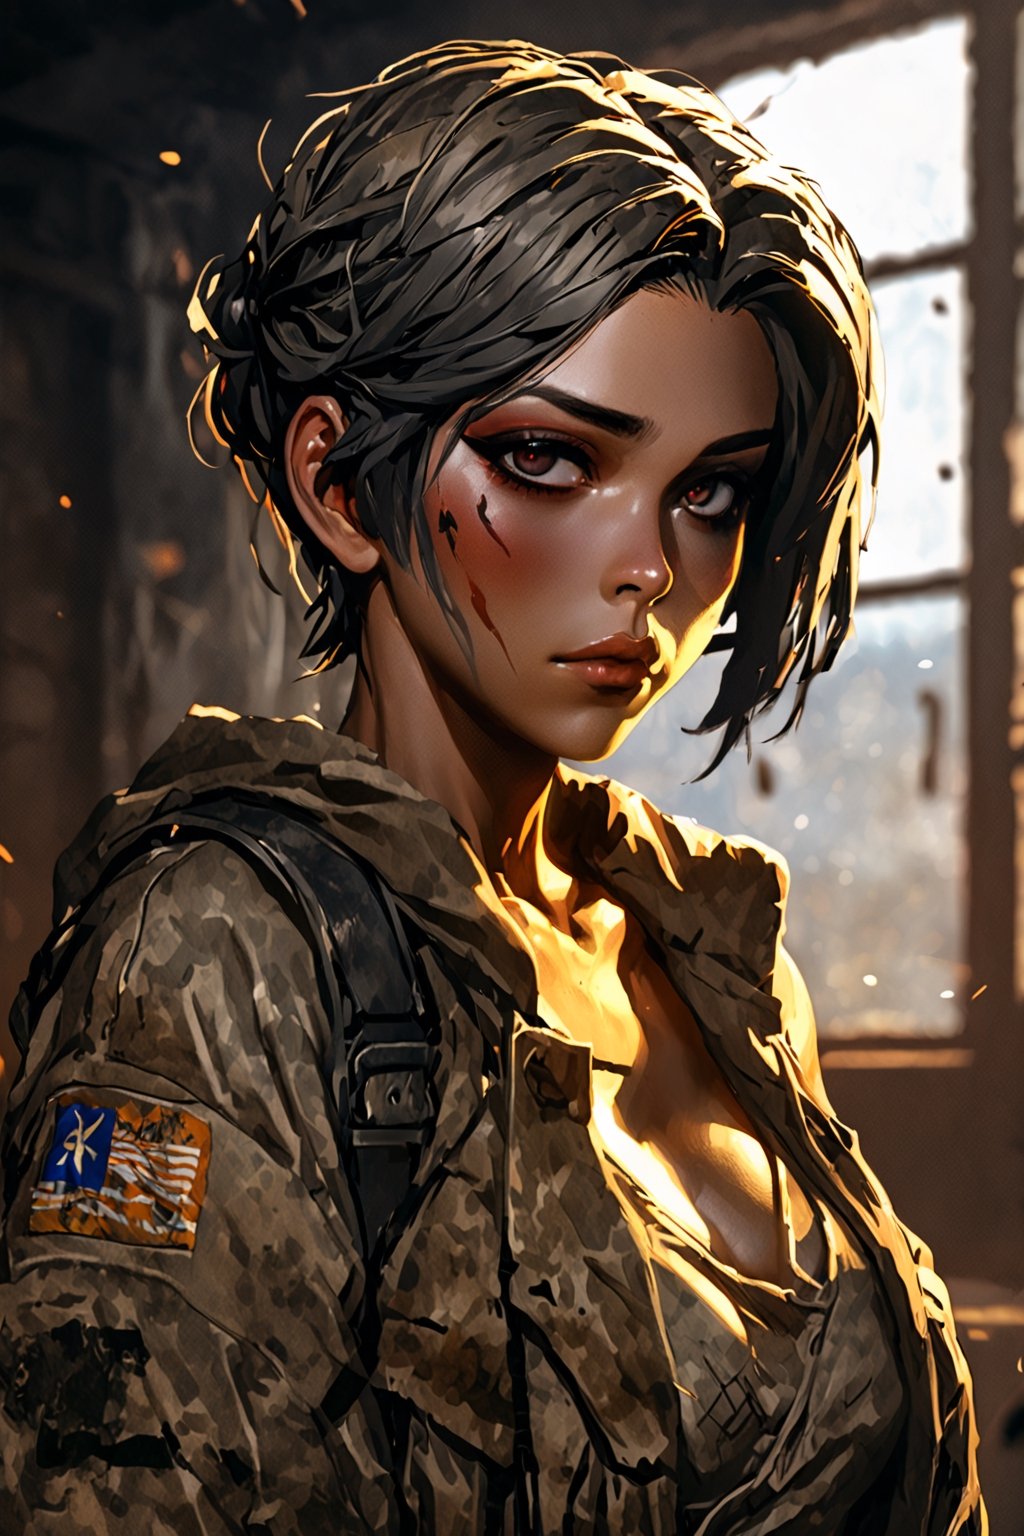 A beautiful post-apocalyptic scene with a sad woman, preocupation face, beautiful gothic make-up, camouflage details, gray eyes, its 40 years old woman, (30-40 years old anime woman : 2), have a definited thick body, (sensual thick body : 2), dressed like a survivor style, dystopian wallpaper art style, dystopian abandoned restaurant, sunlighting entering through the window, (uhd, vivid colors, high-contrast, bloom lighting), (depht of field : 2), (ilya kuvshinov art : 1.6) (sam does art : 1.2), (manhwa wallpaper art art : 1.4), (realistic anime cgi art : 1.2), (masterpiece), make a manhwa sensual art, ,3D